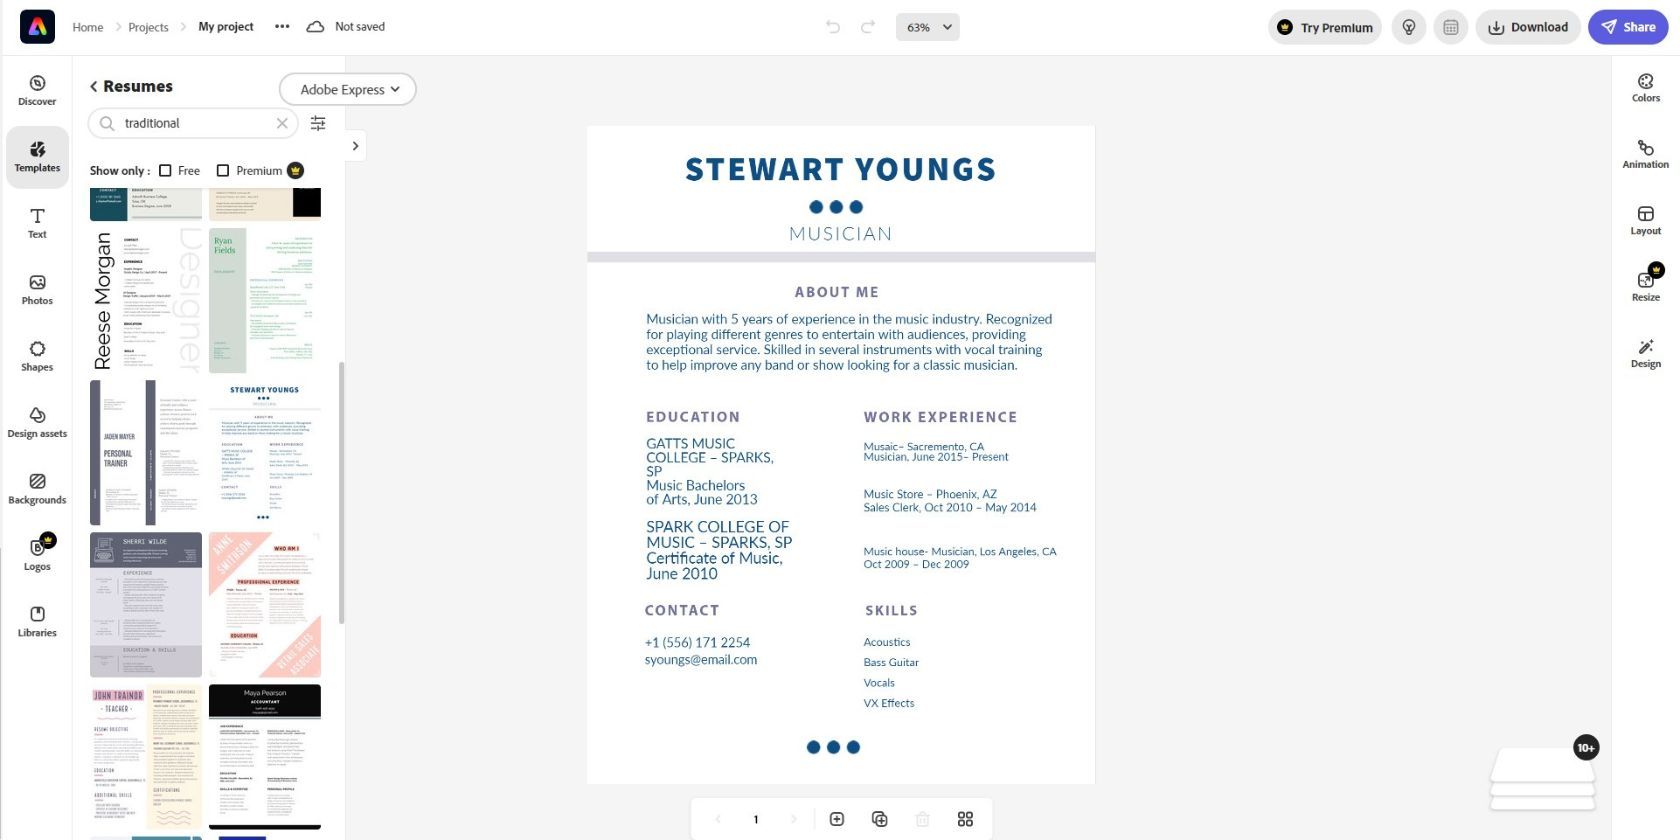 sample one-page resume on adobe express